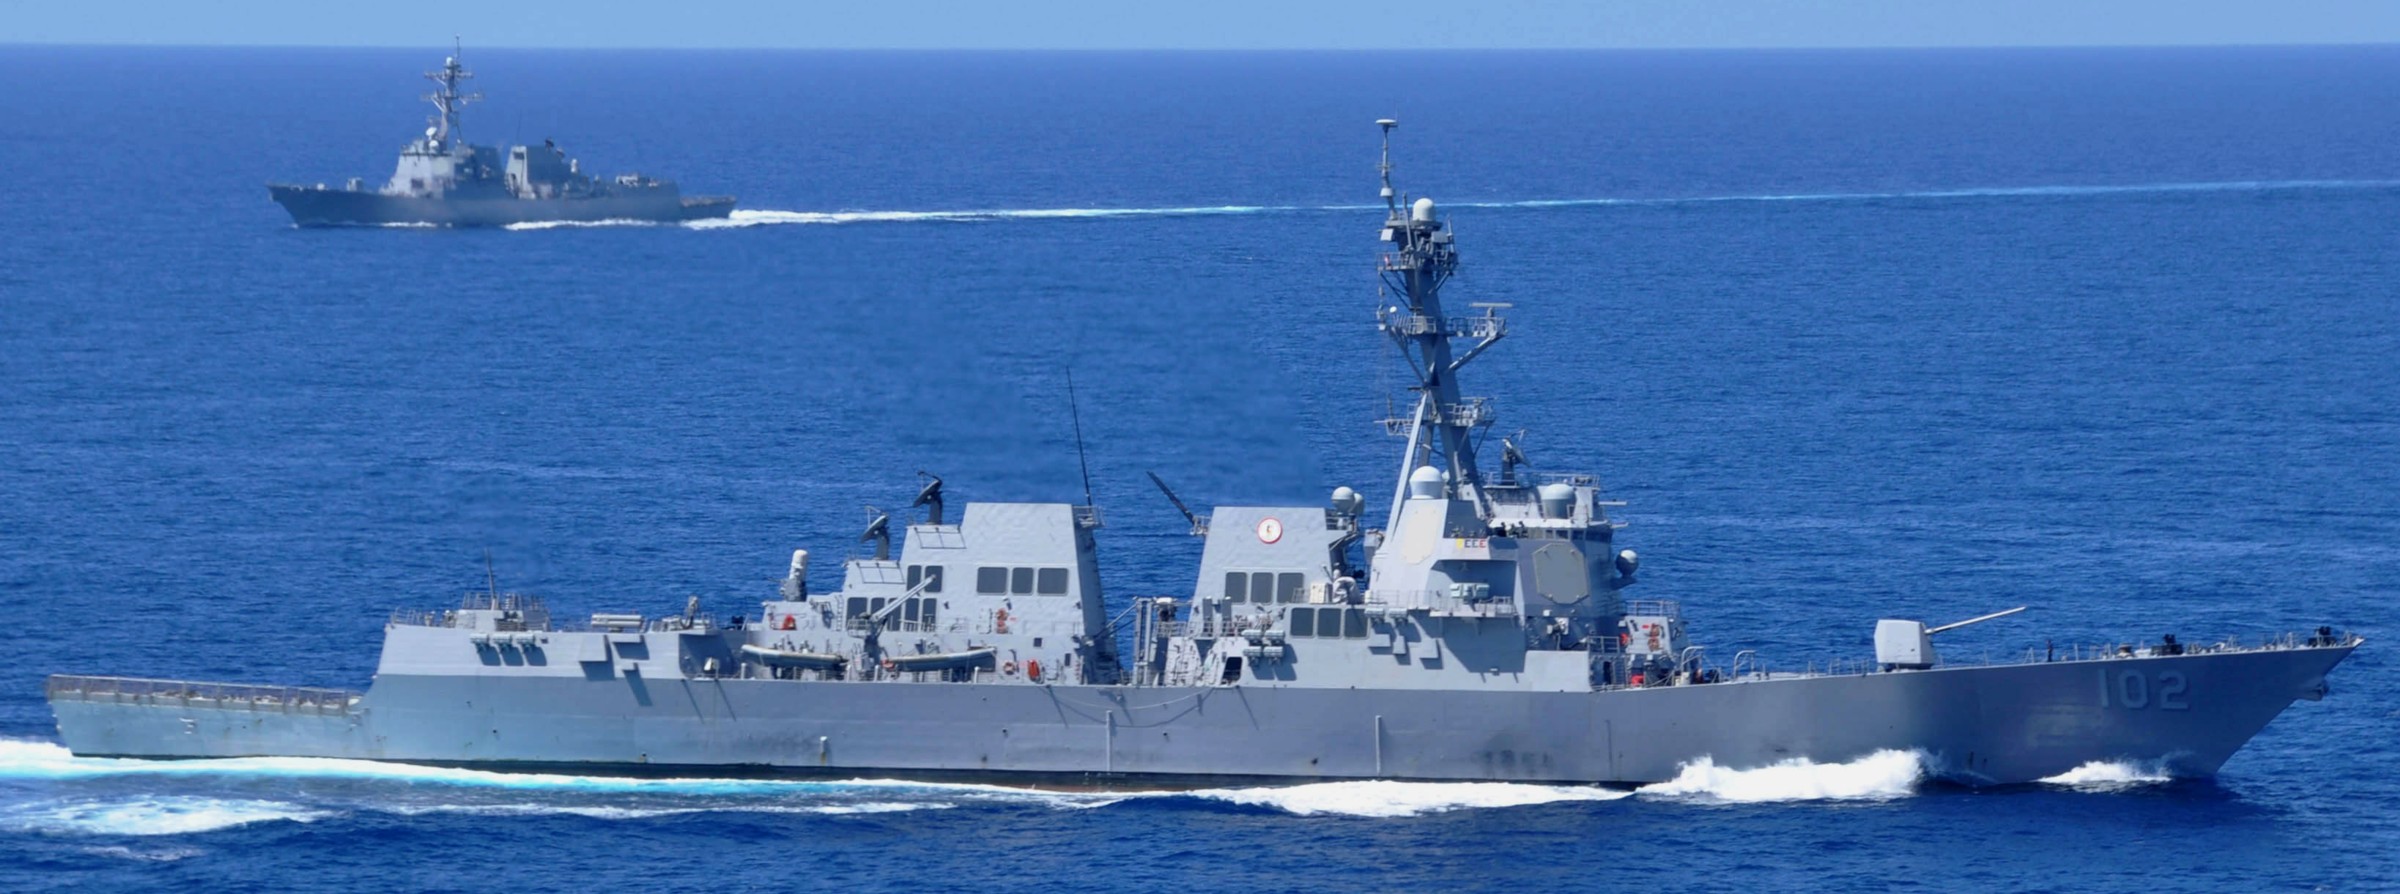 ddg-102 uss sampson arleigh burke class guided missile destroyer aegis us navy south china sea 39